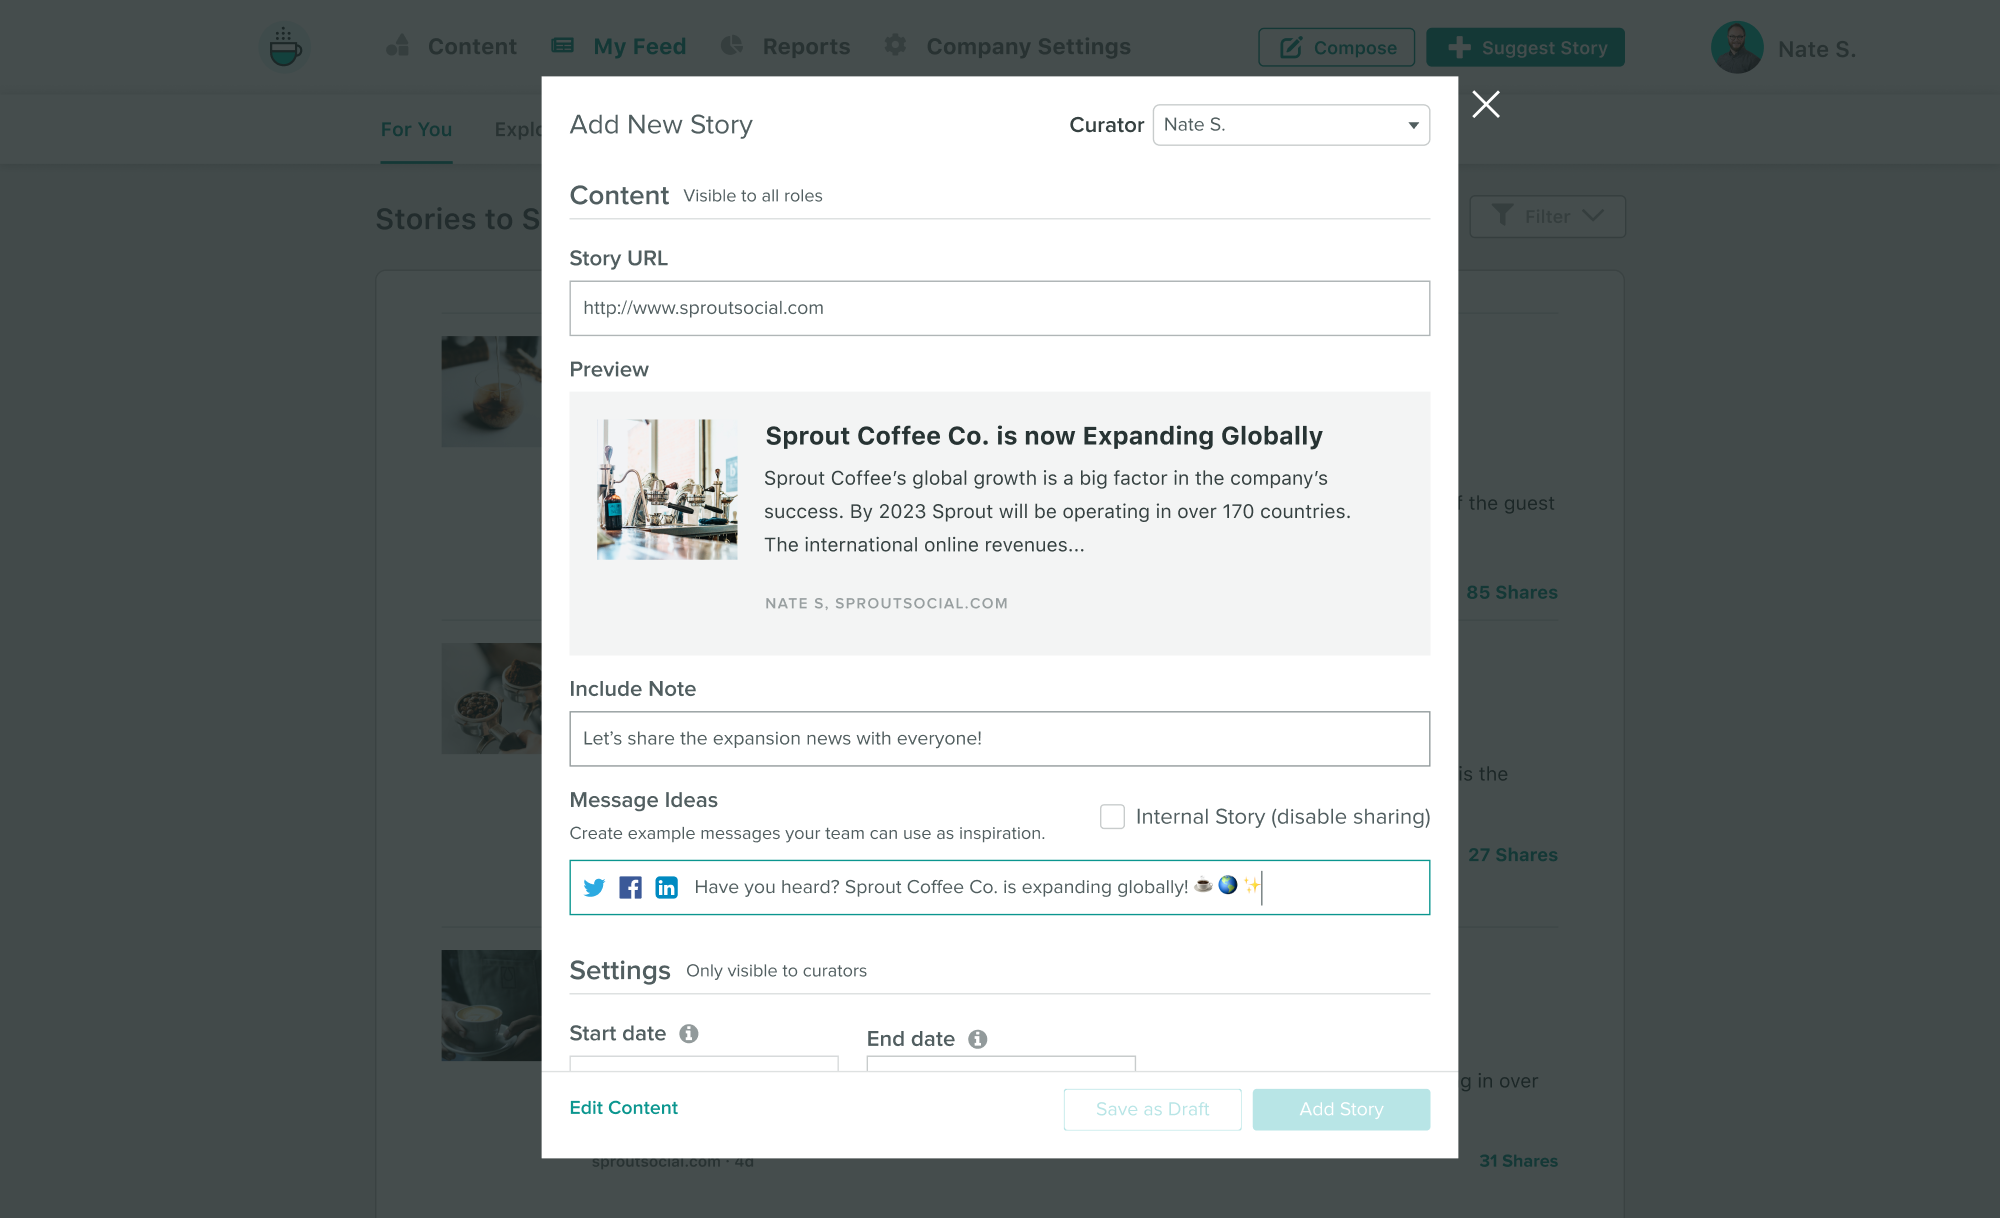 An example of how to add an approved story in Sprout's Employee Advocacy tool